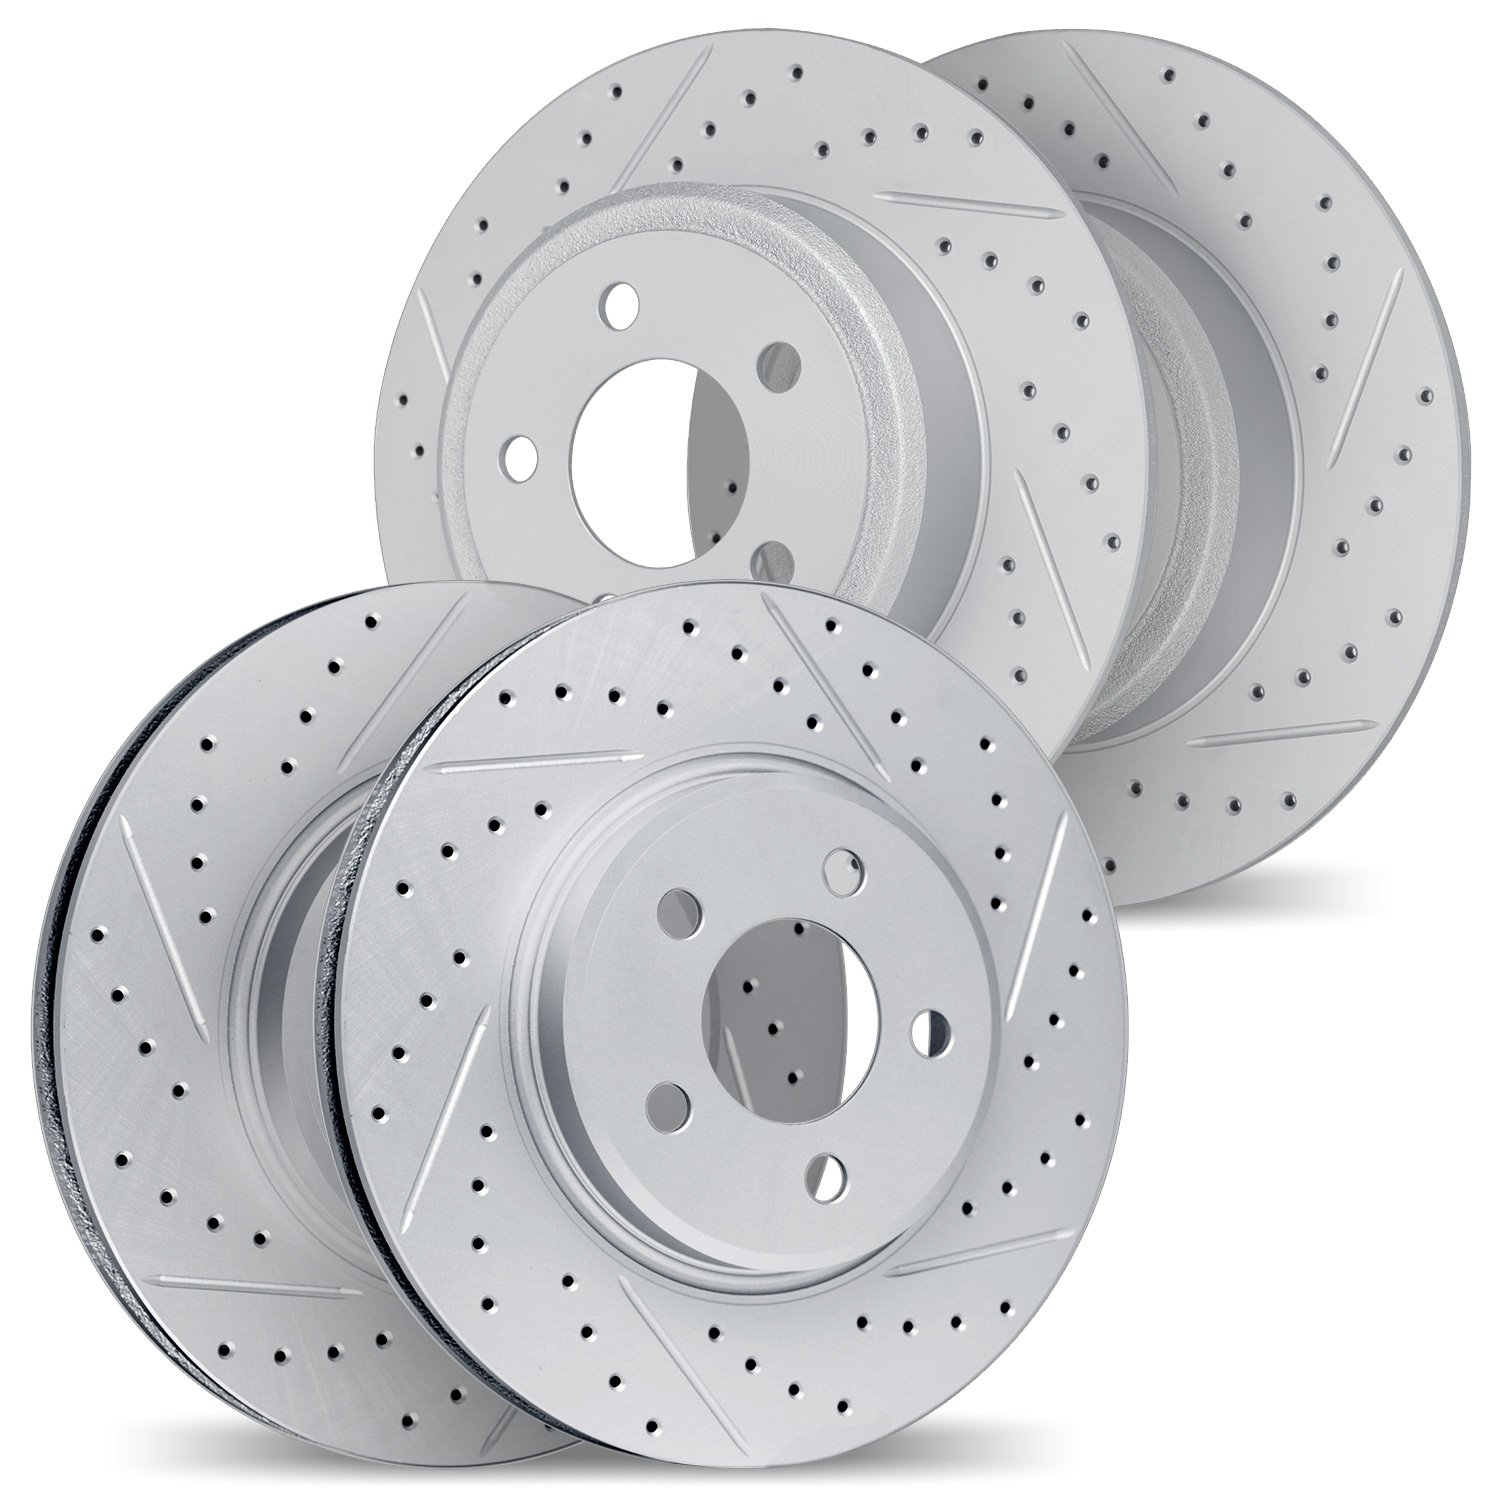 2004-59062 Geoperformance Drilled/Slotted Brake Rotors, Fits Select Acura/Honda, Position: Front and Rear